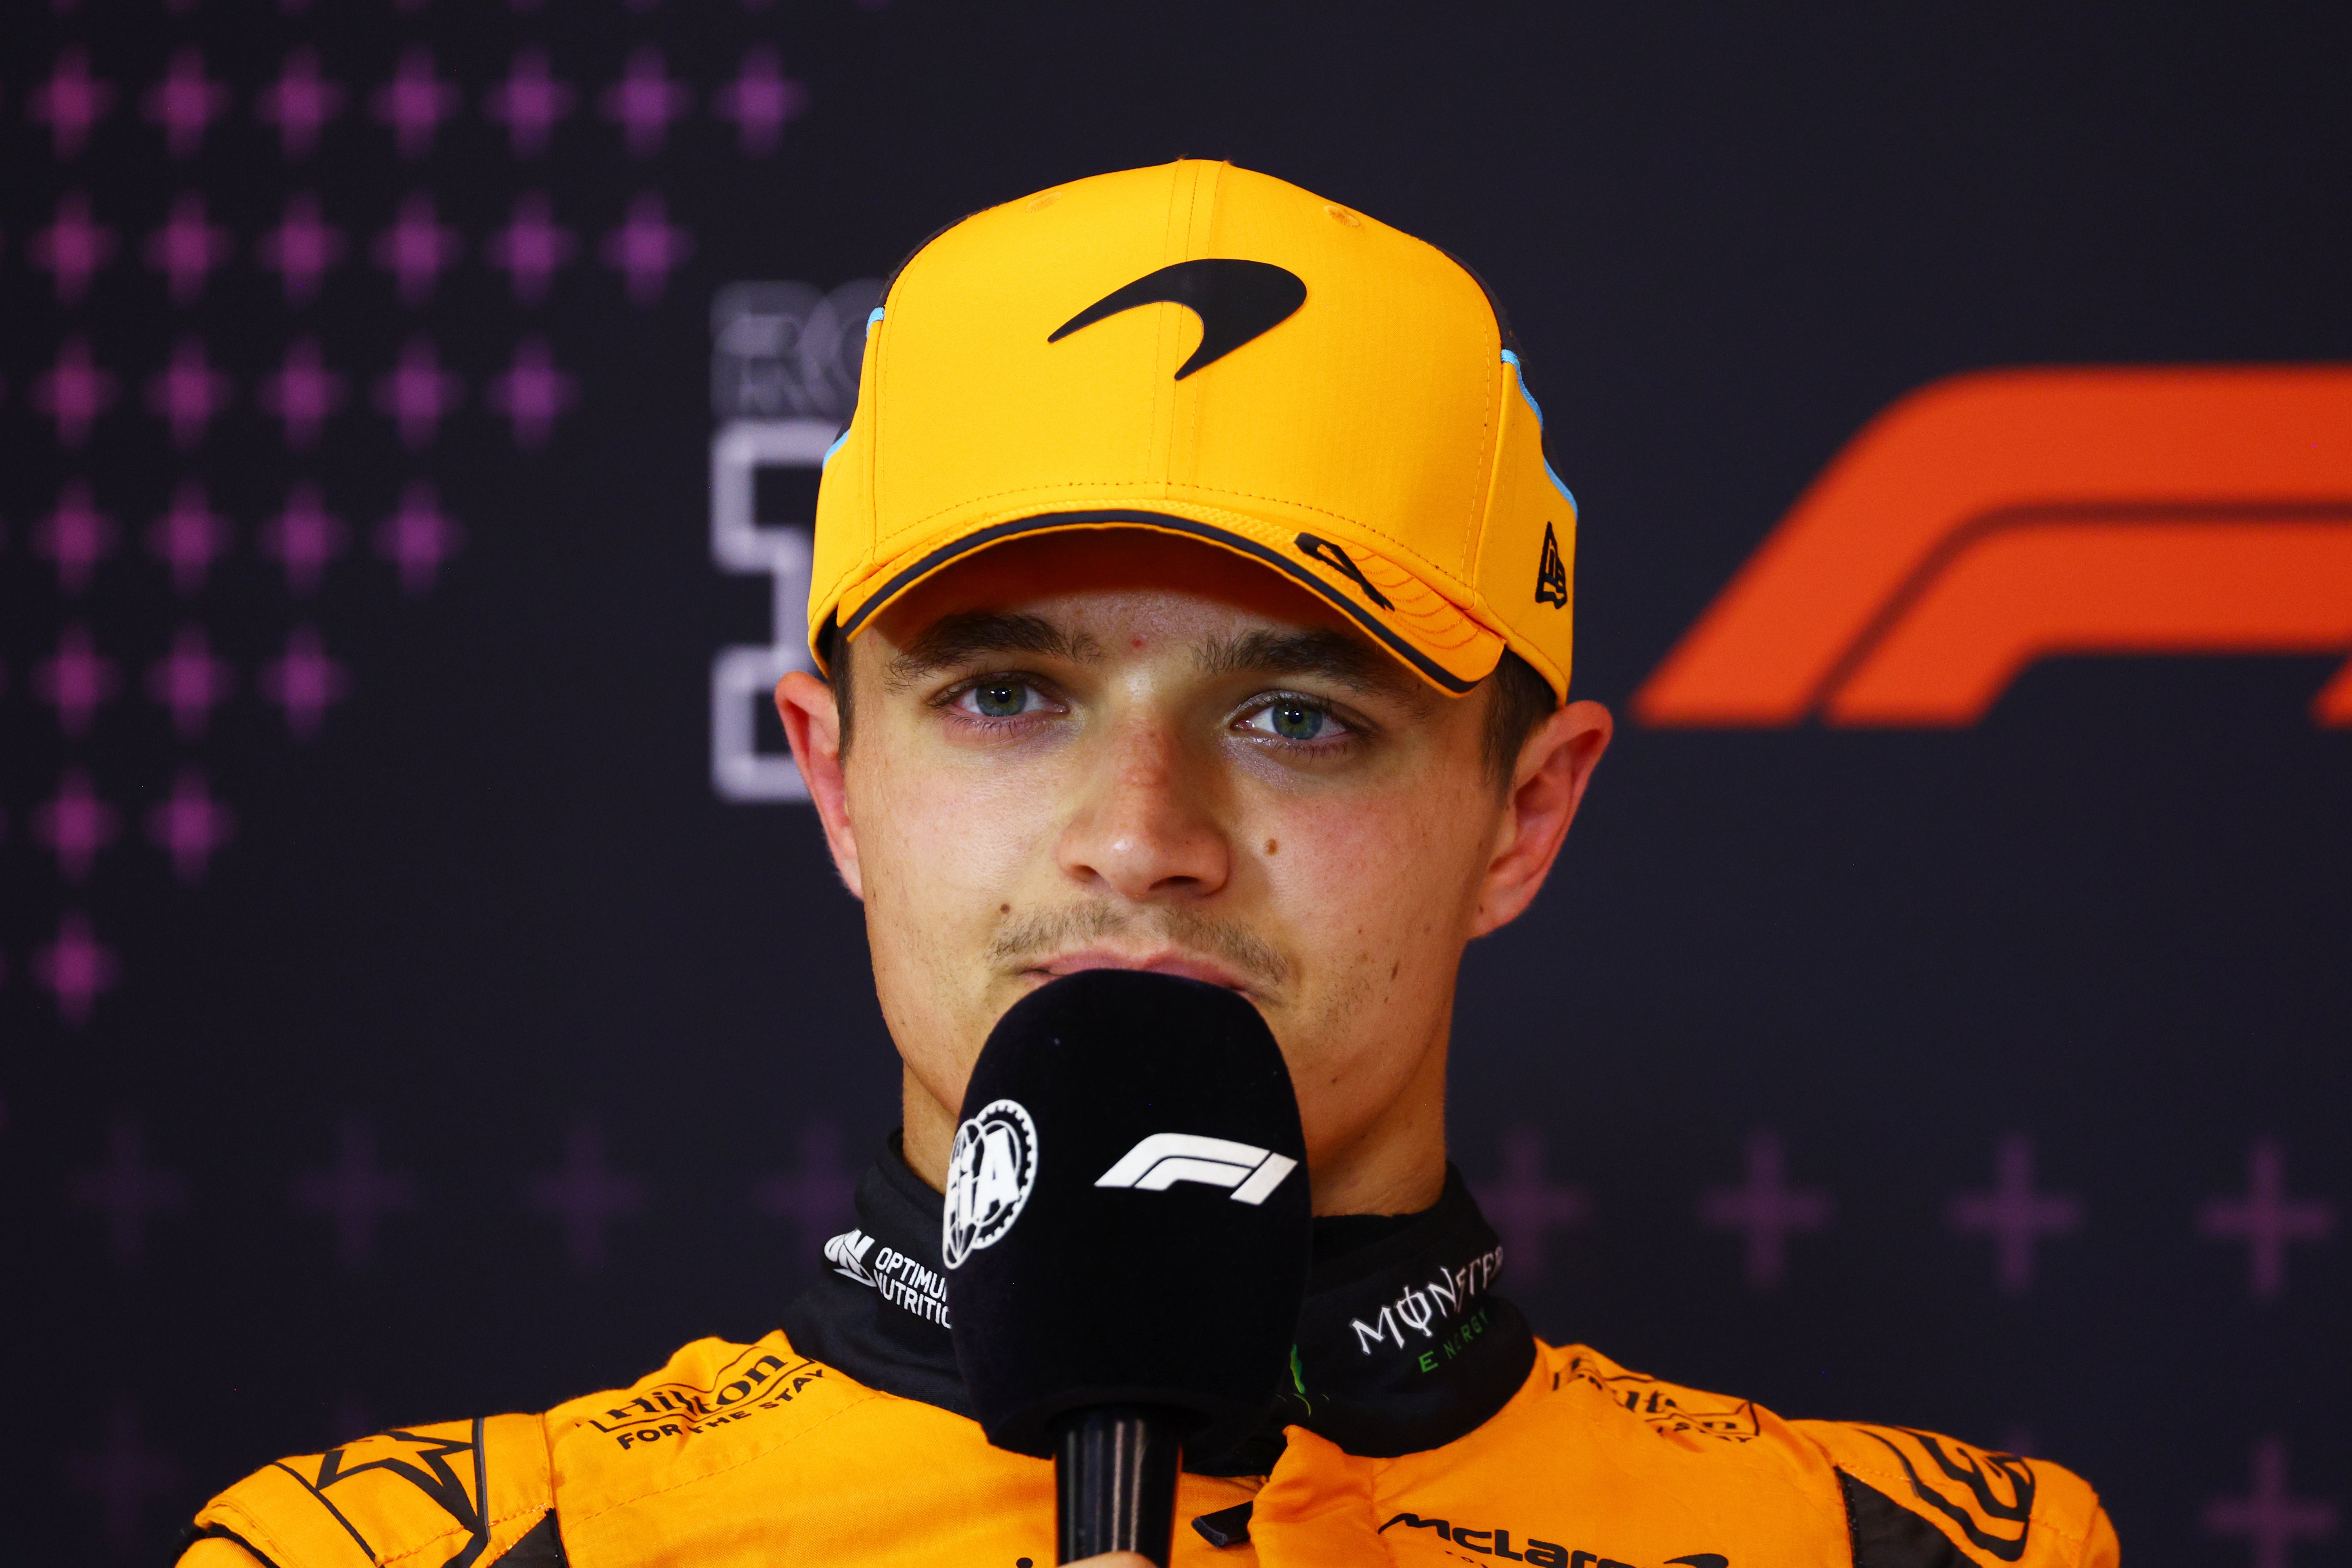 Lando Norris was unhappy with Max Verstappen’s defence during their tussle in Austria